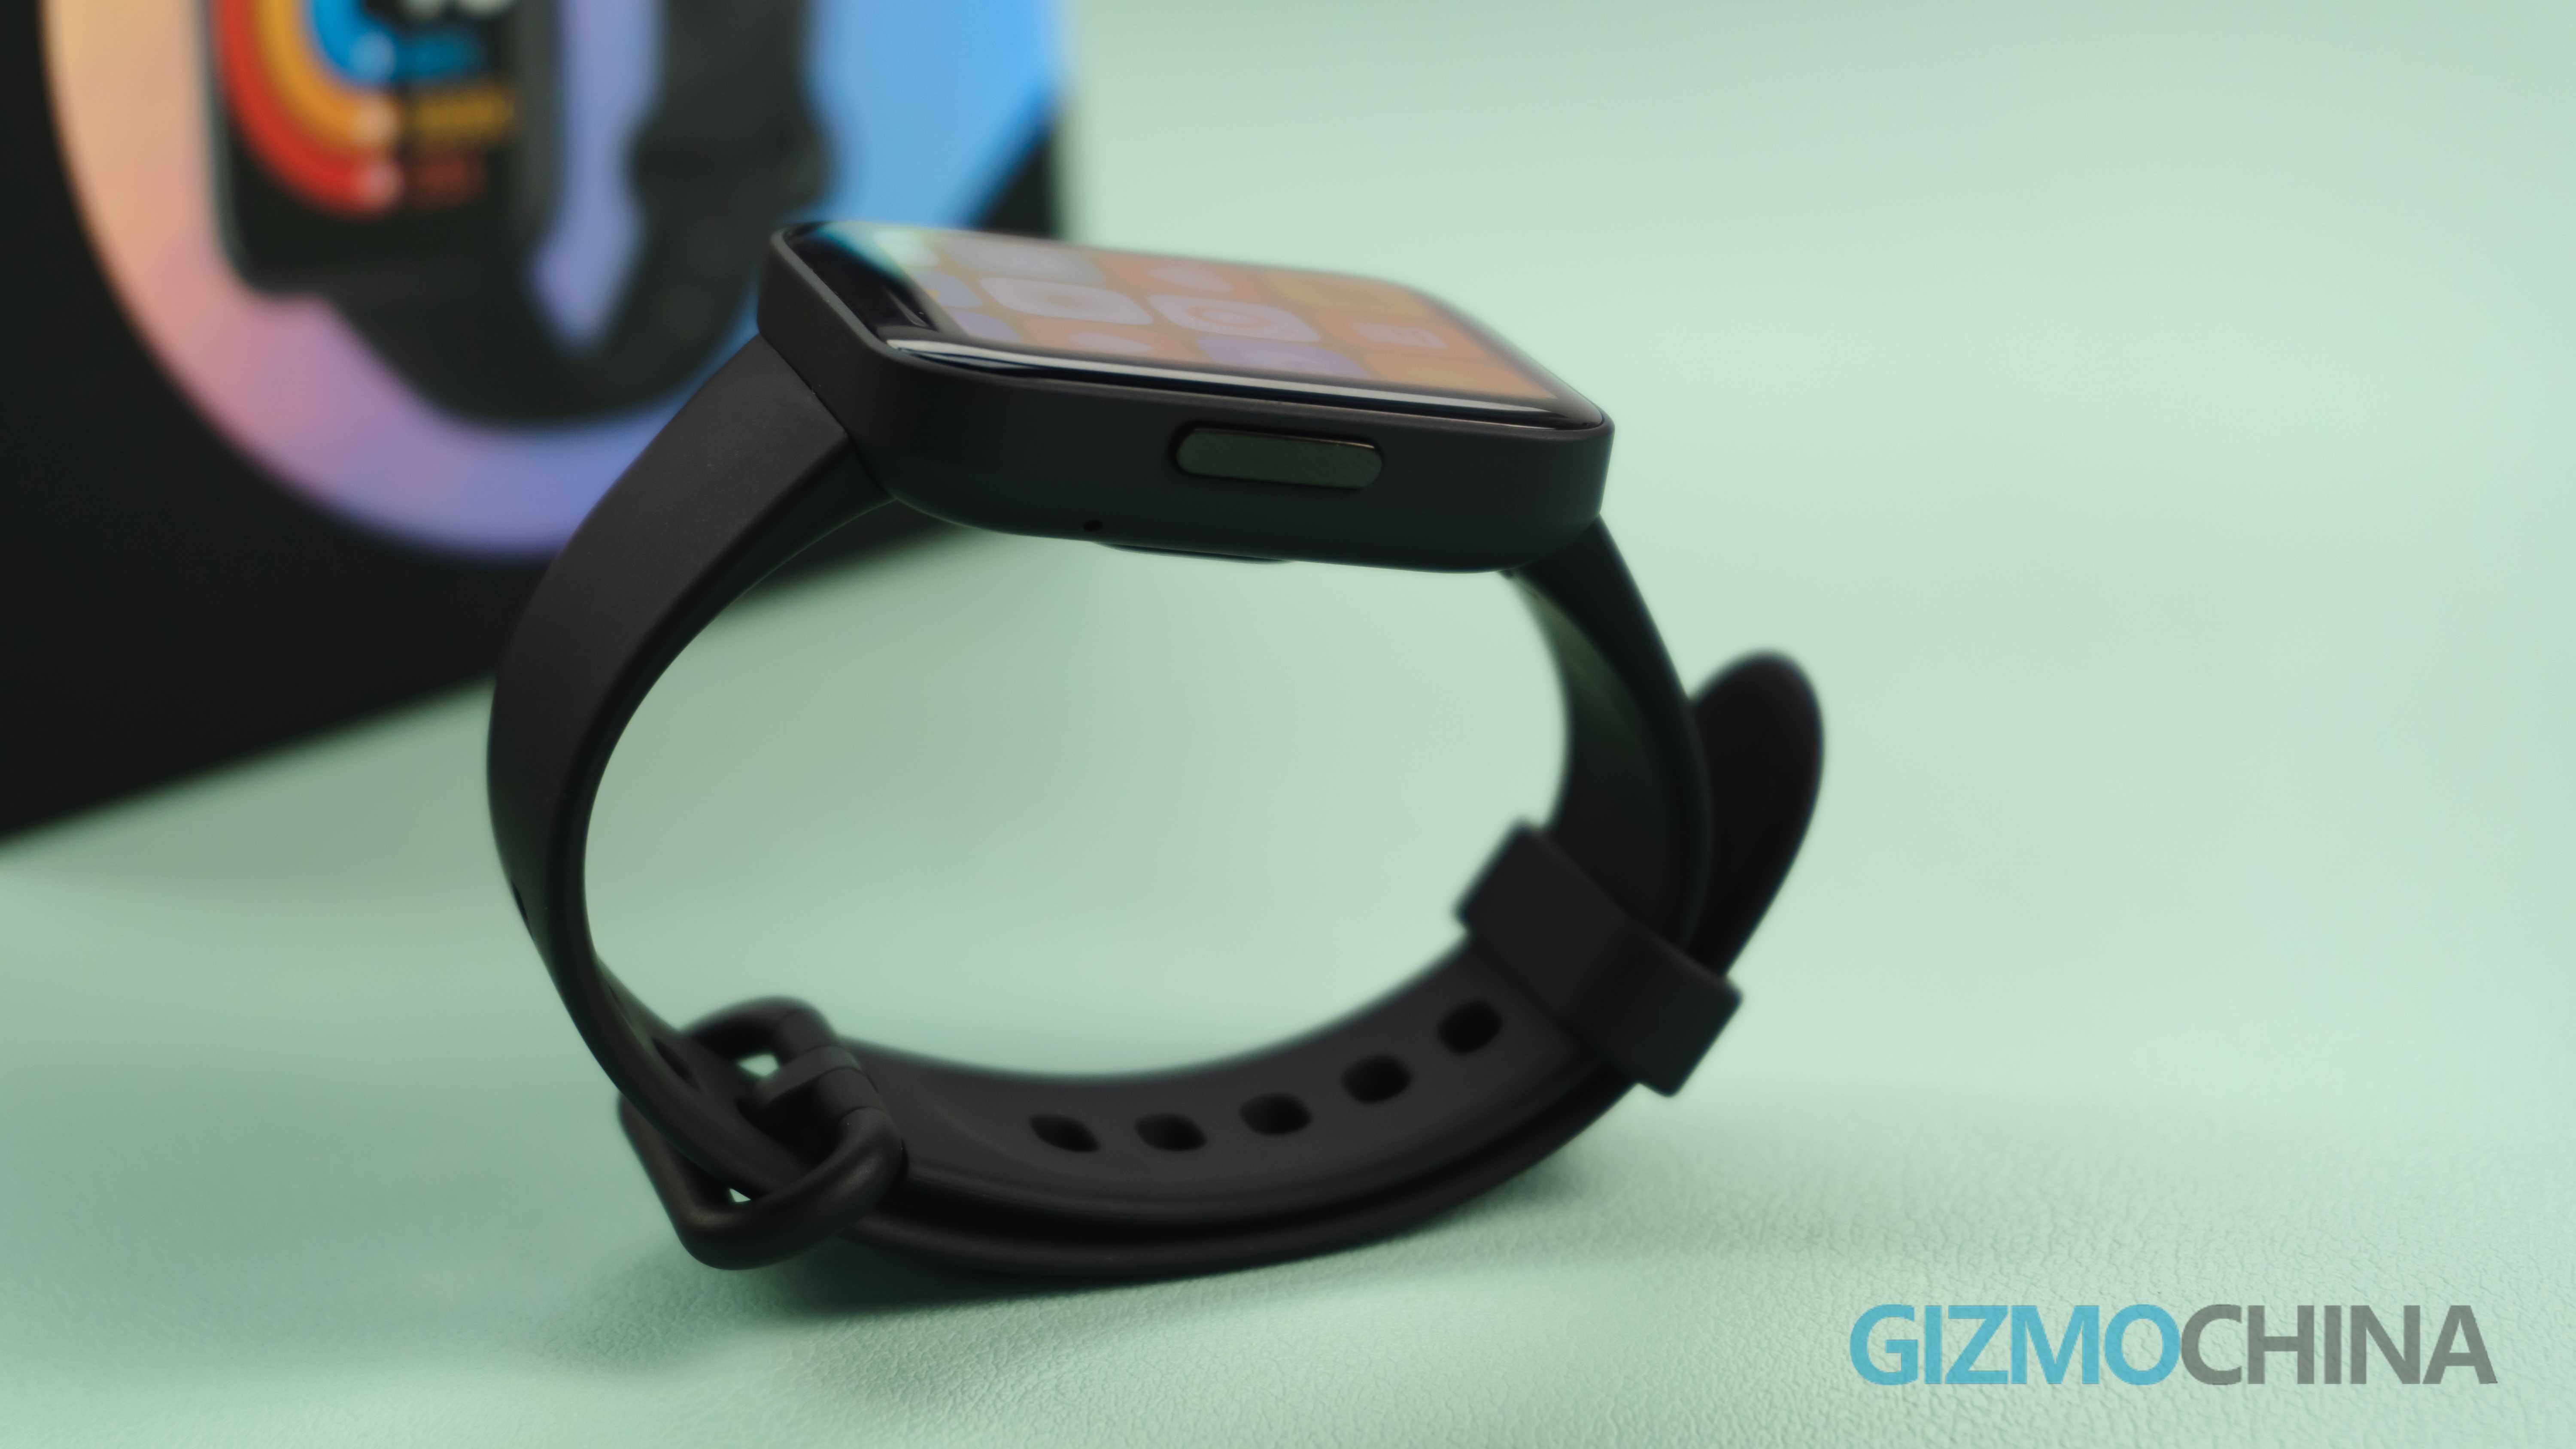 Redmi Watch 2 Hands-on: Now features an AMOLED display with SpO2 monitoring  - Gizmochina